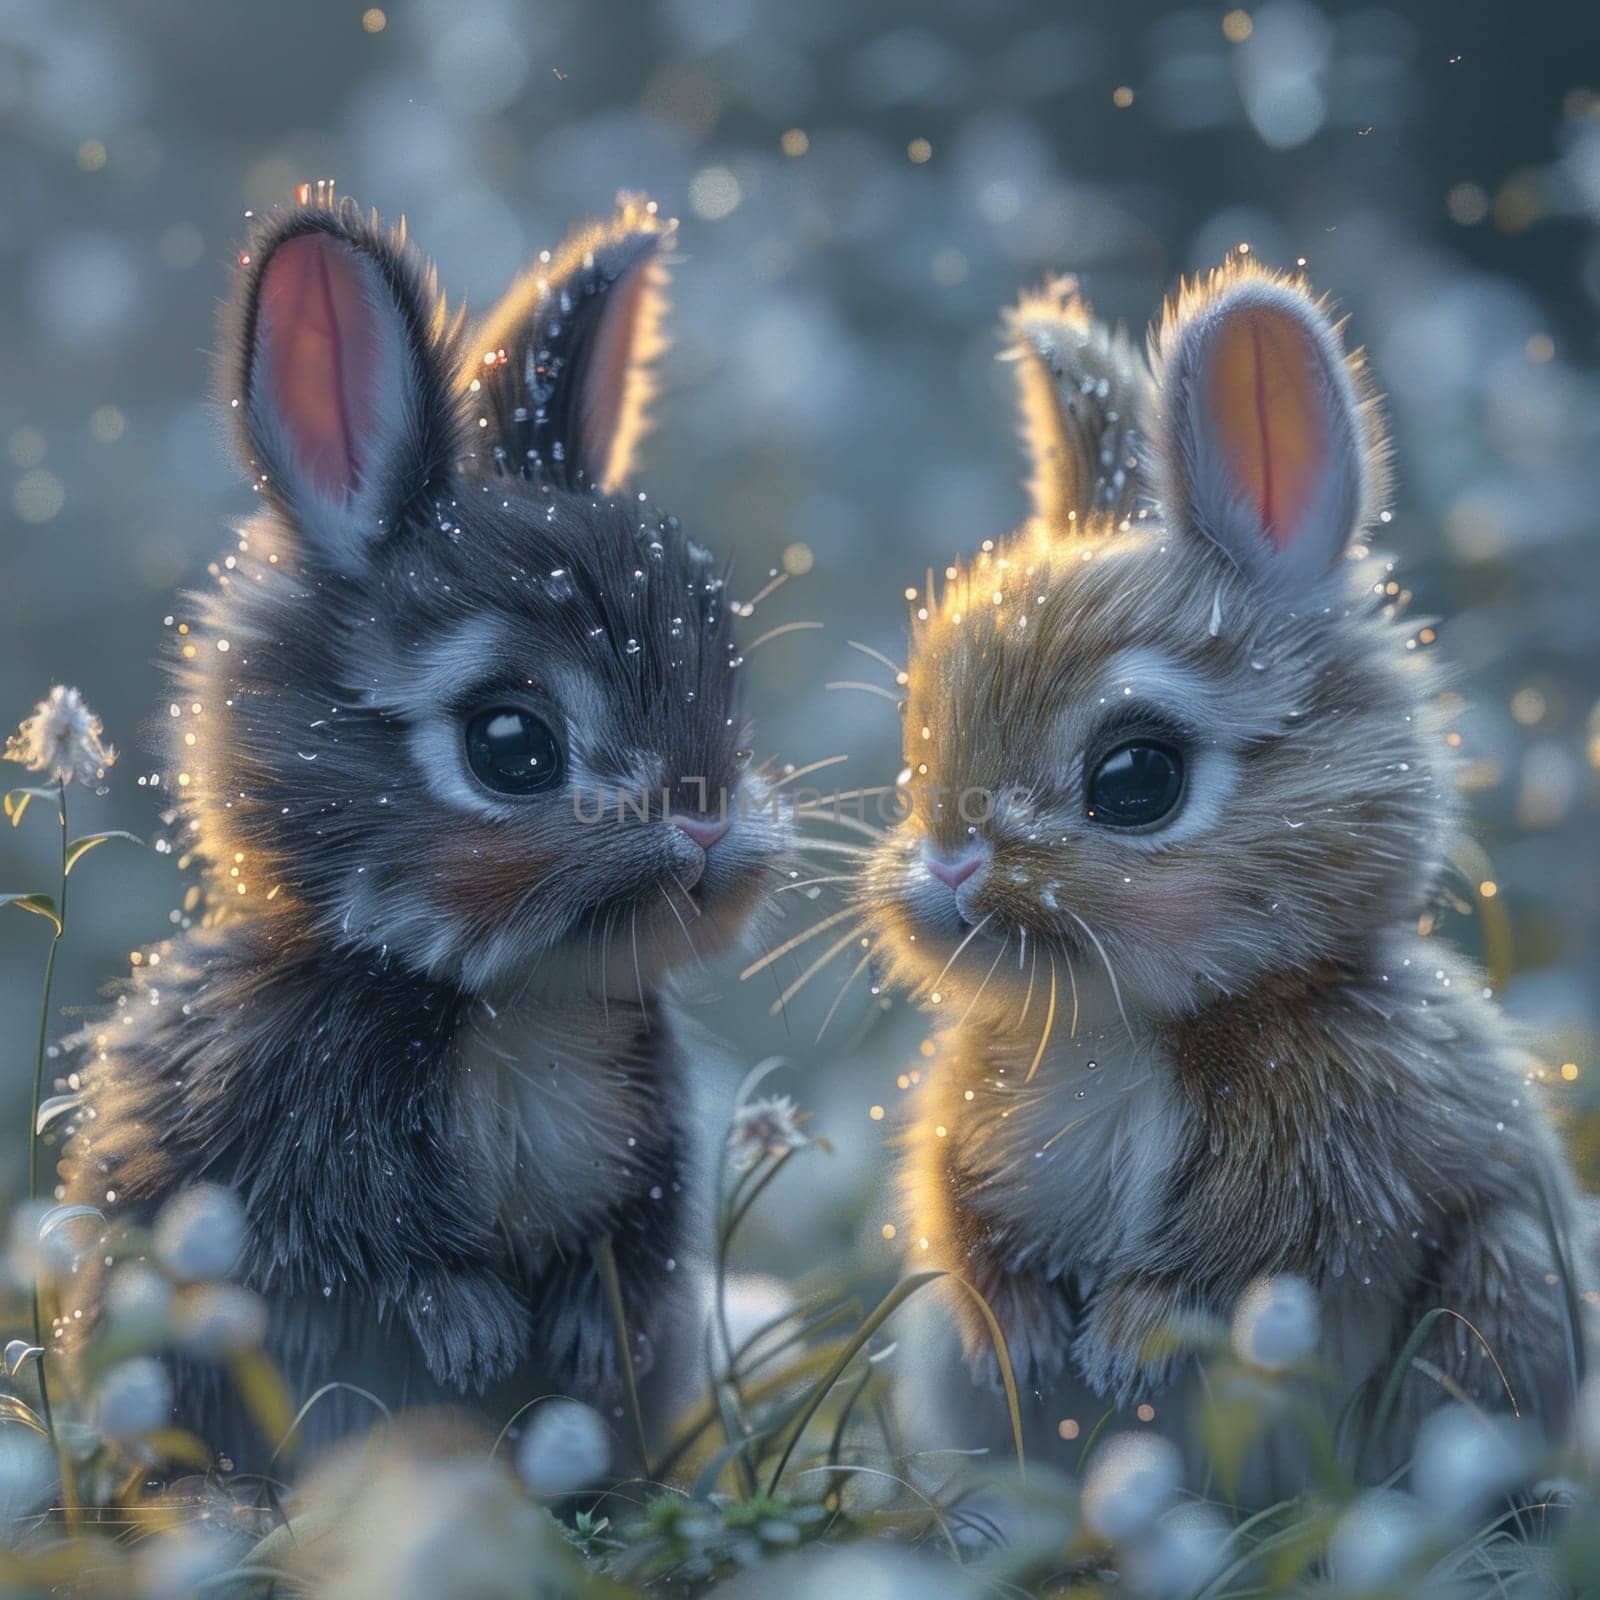 Two Small Rabbits Sitting Together in Field by but_photo